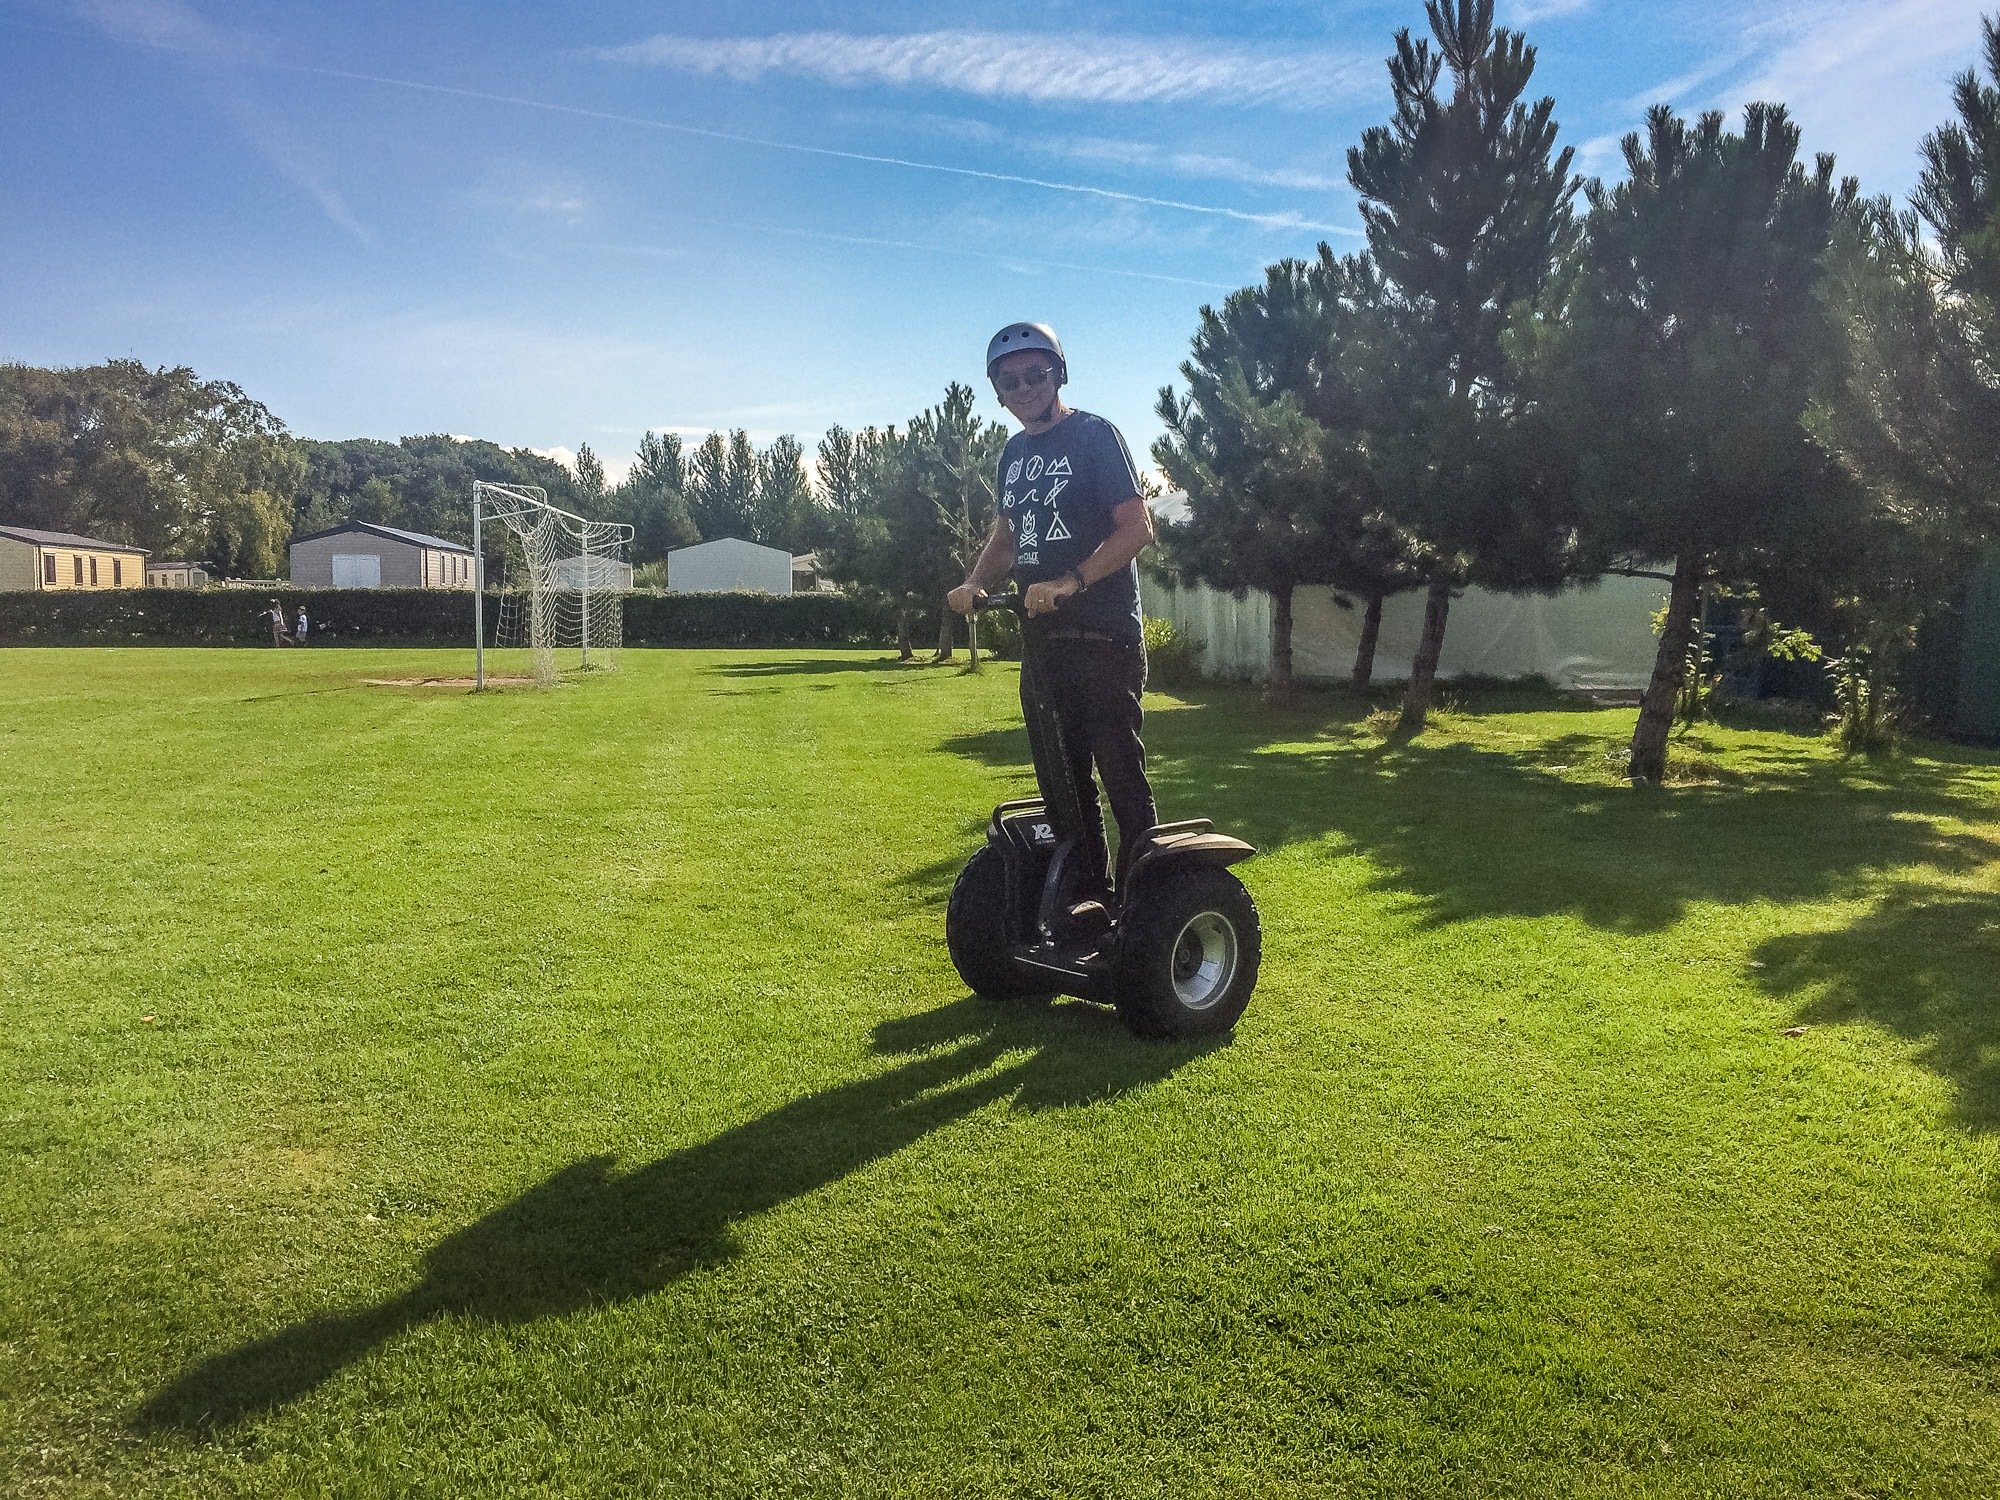 Adult segways from age 12 years and up